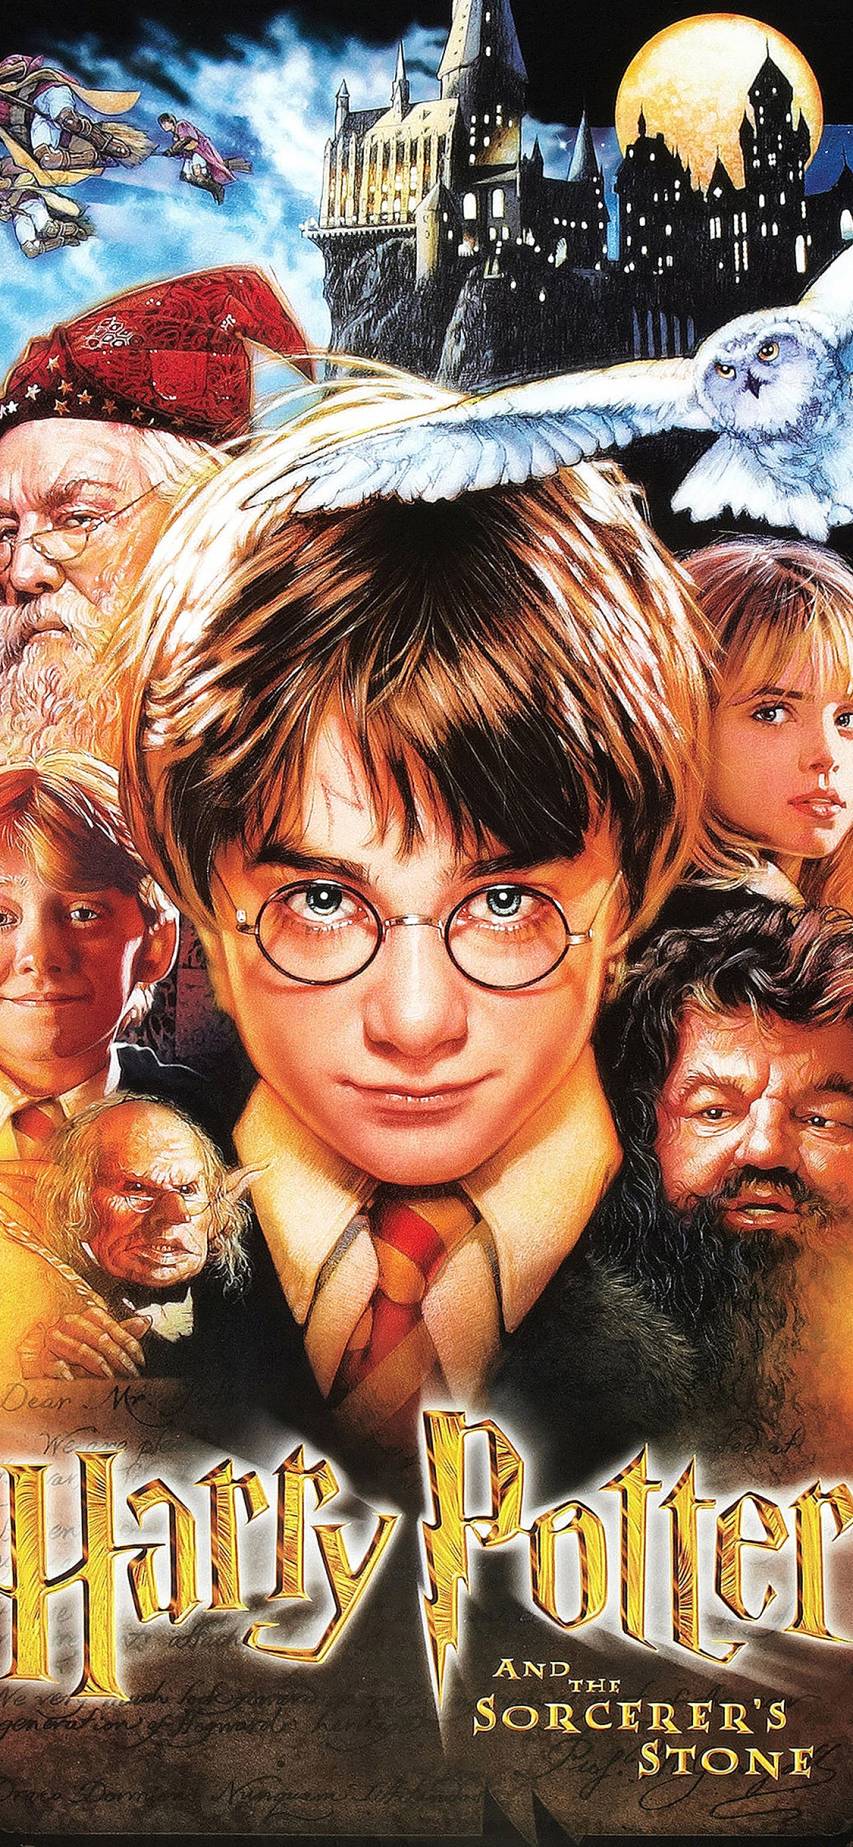 Cool Harry Potter Poster Wallpapers for iPhone